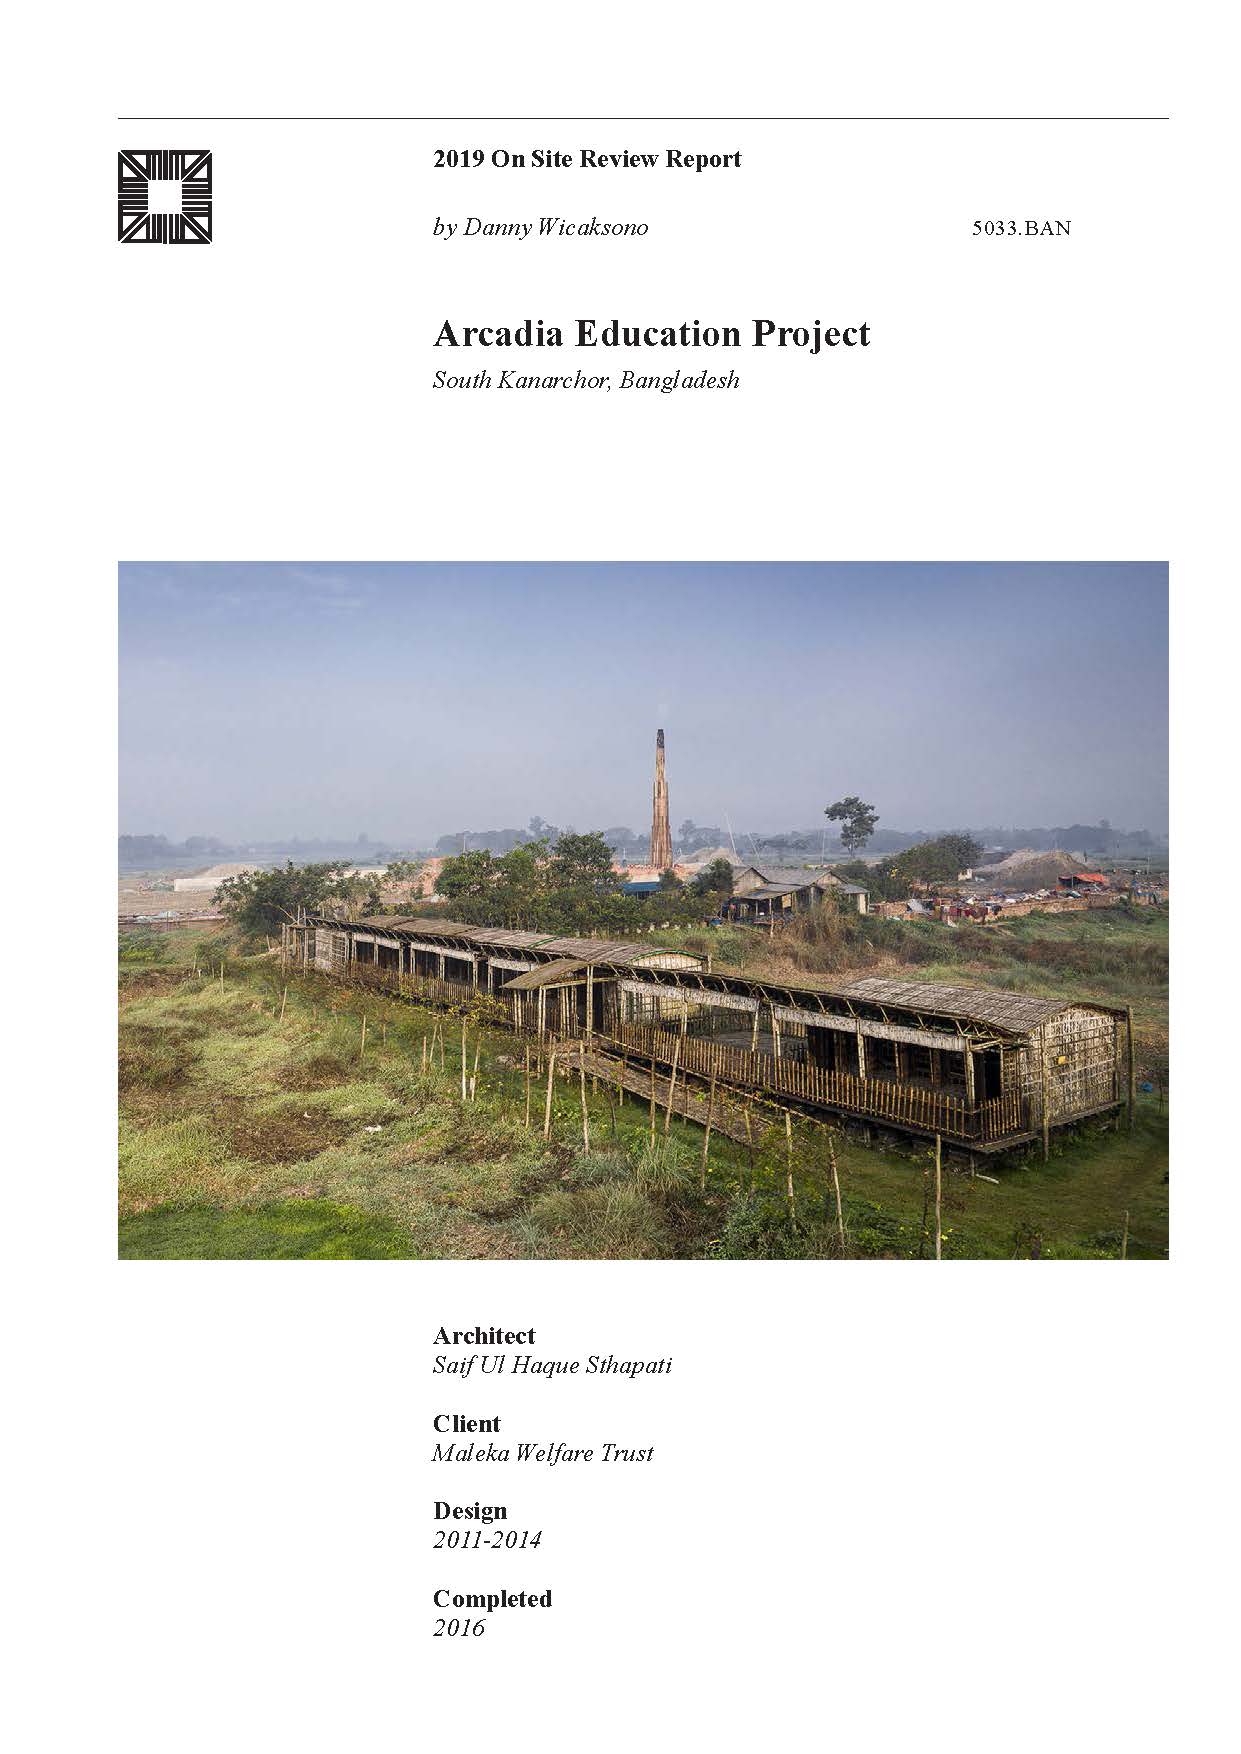 Arcadia Education Project On-site Review Report